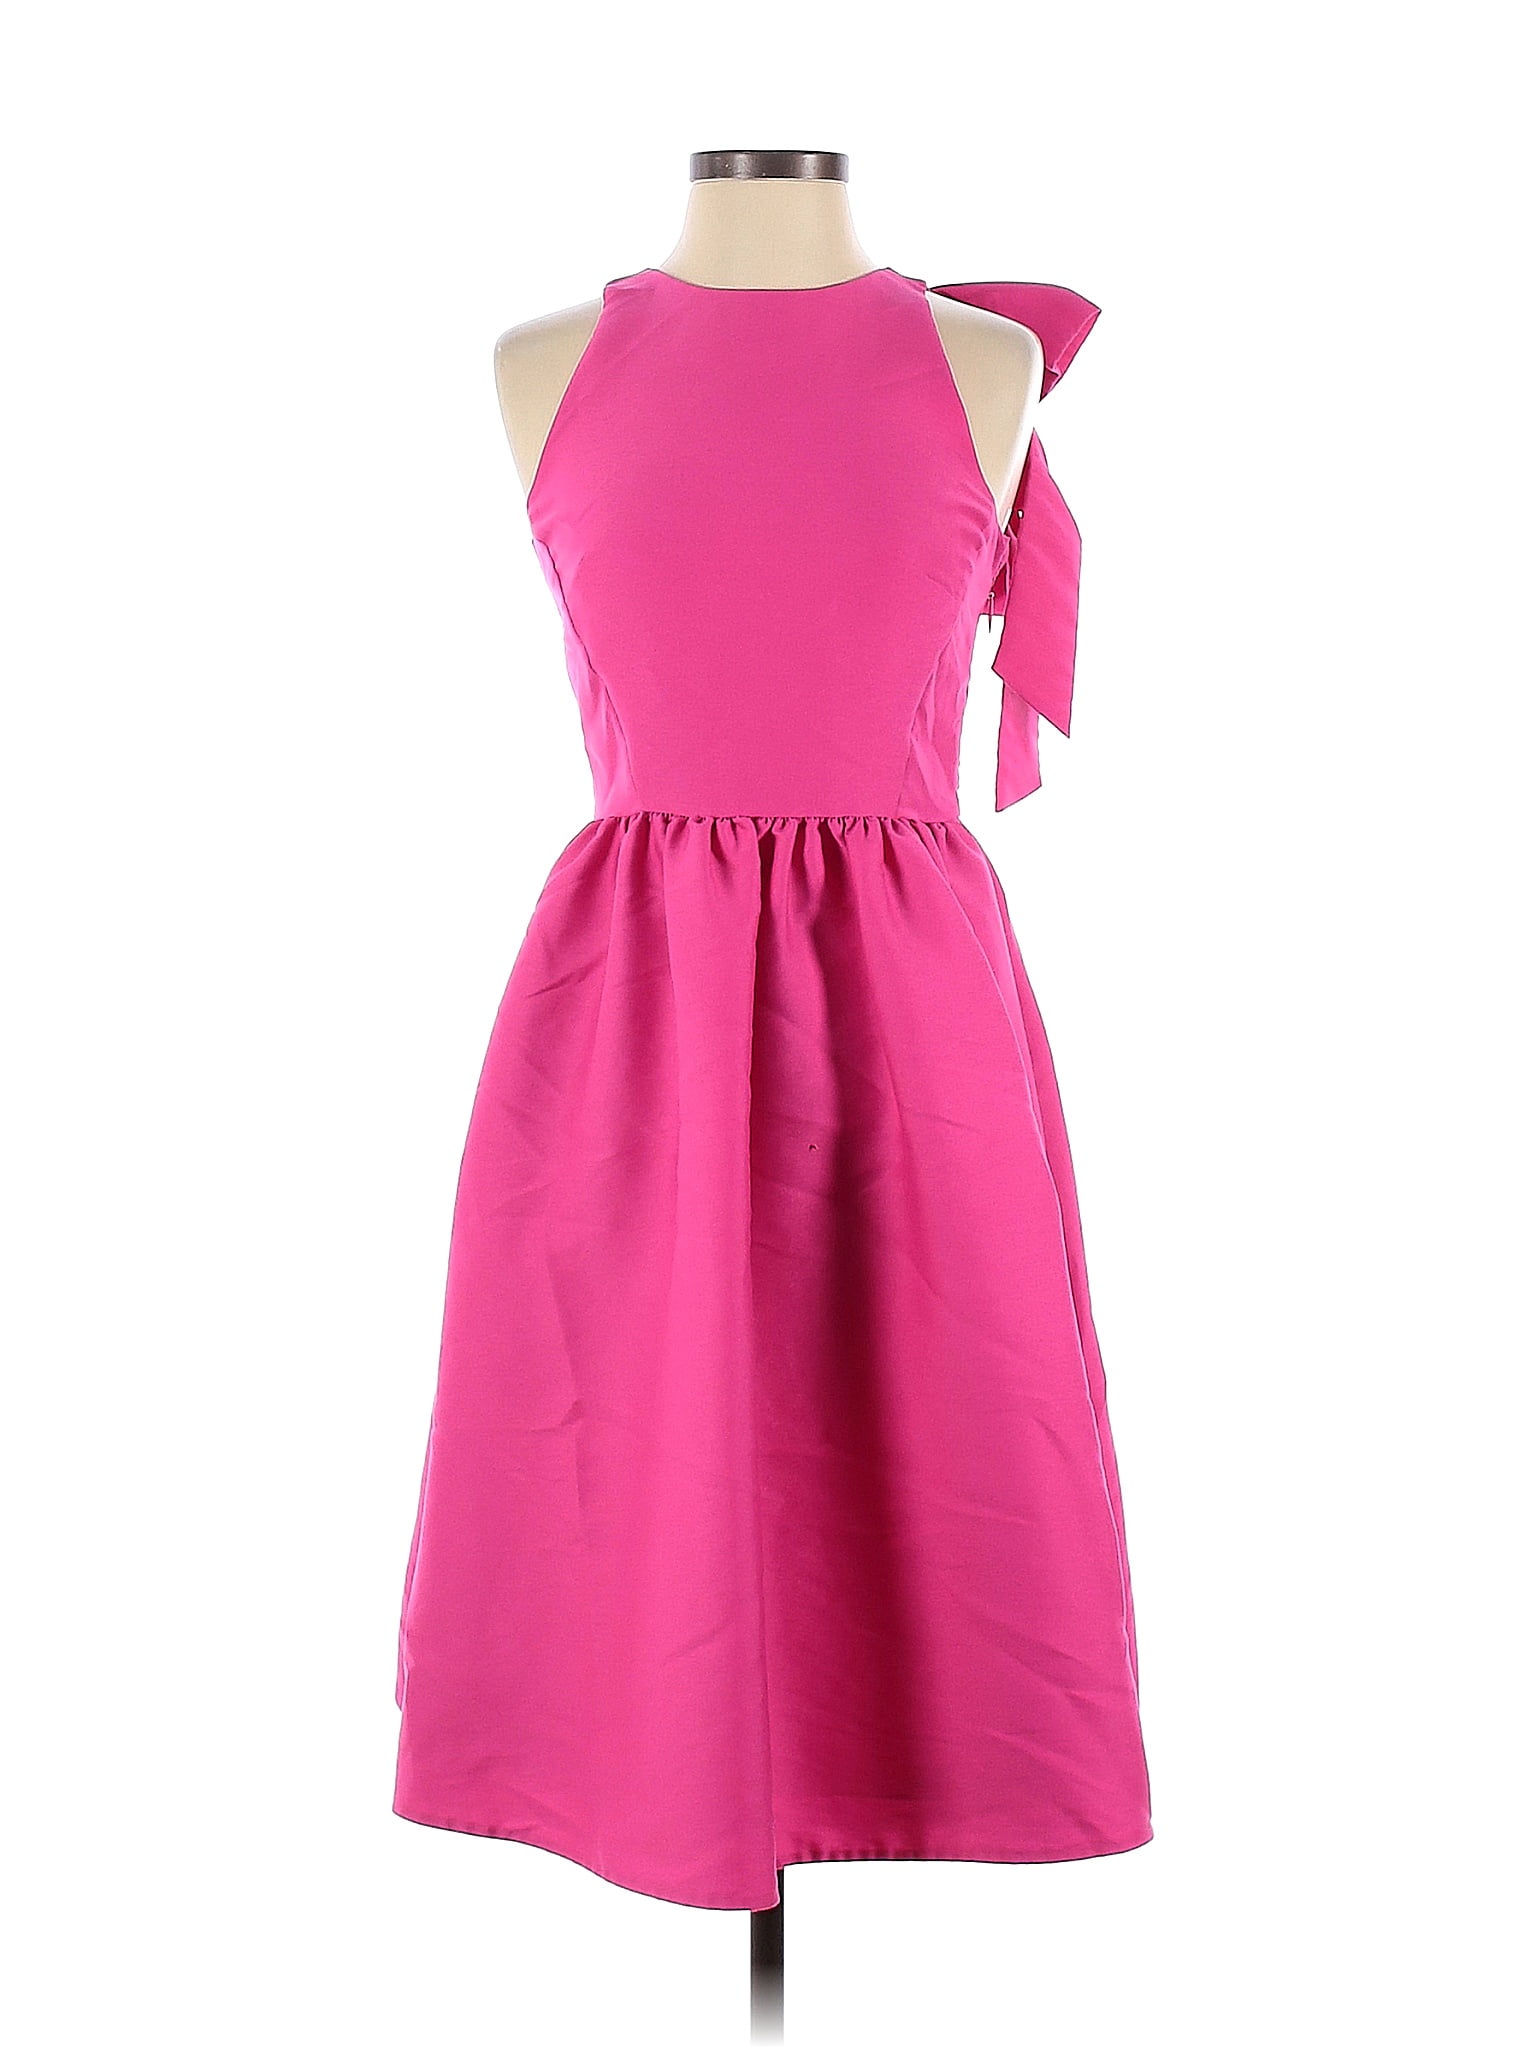 Kate Spade New York 100% Polyester Solid Pink Bougainvillea Bow Back Dress  Size 0 - 76% off